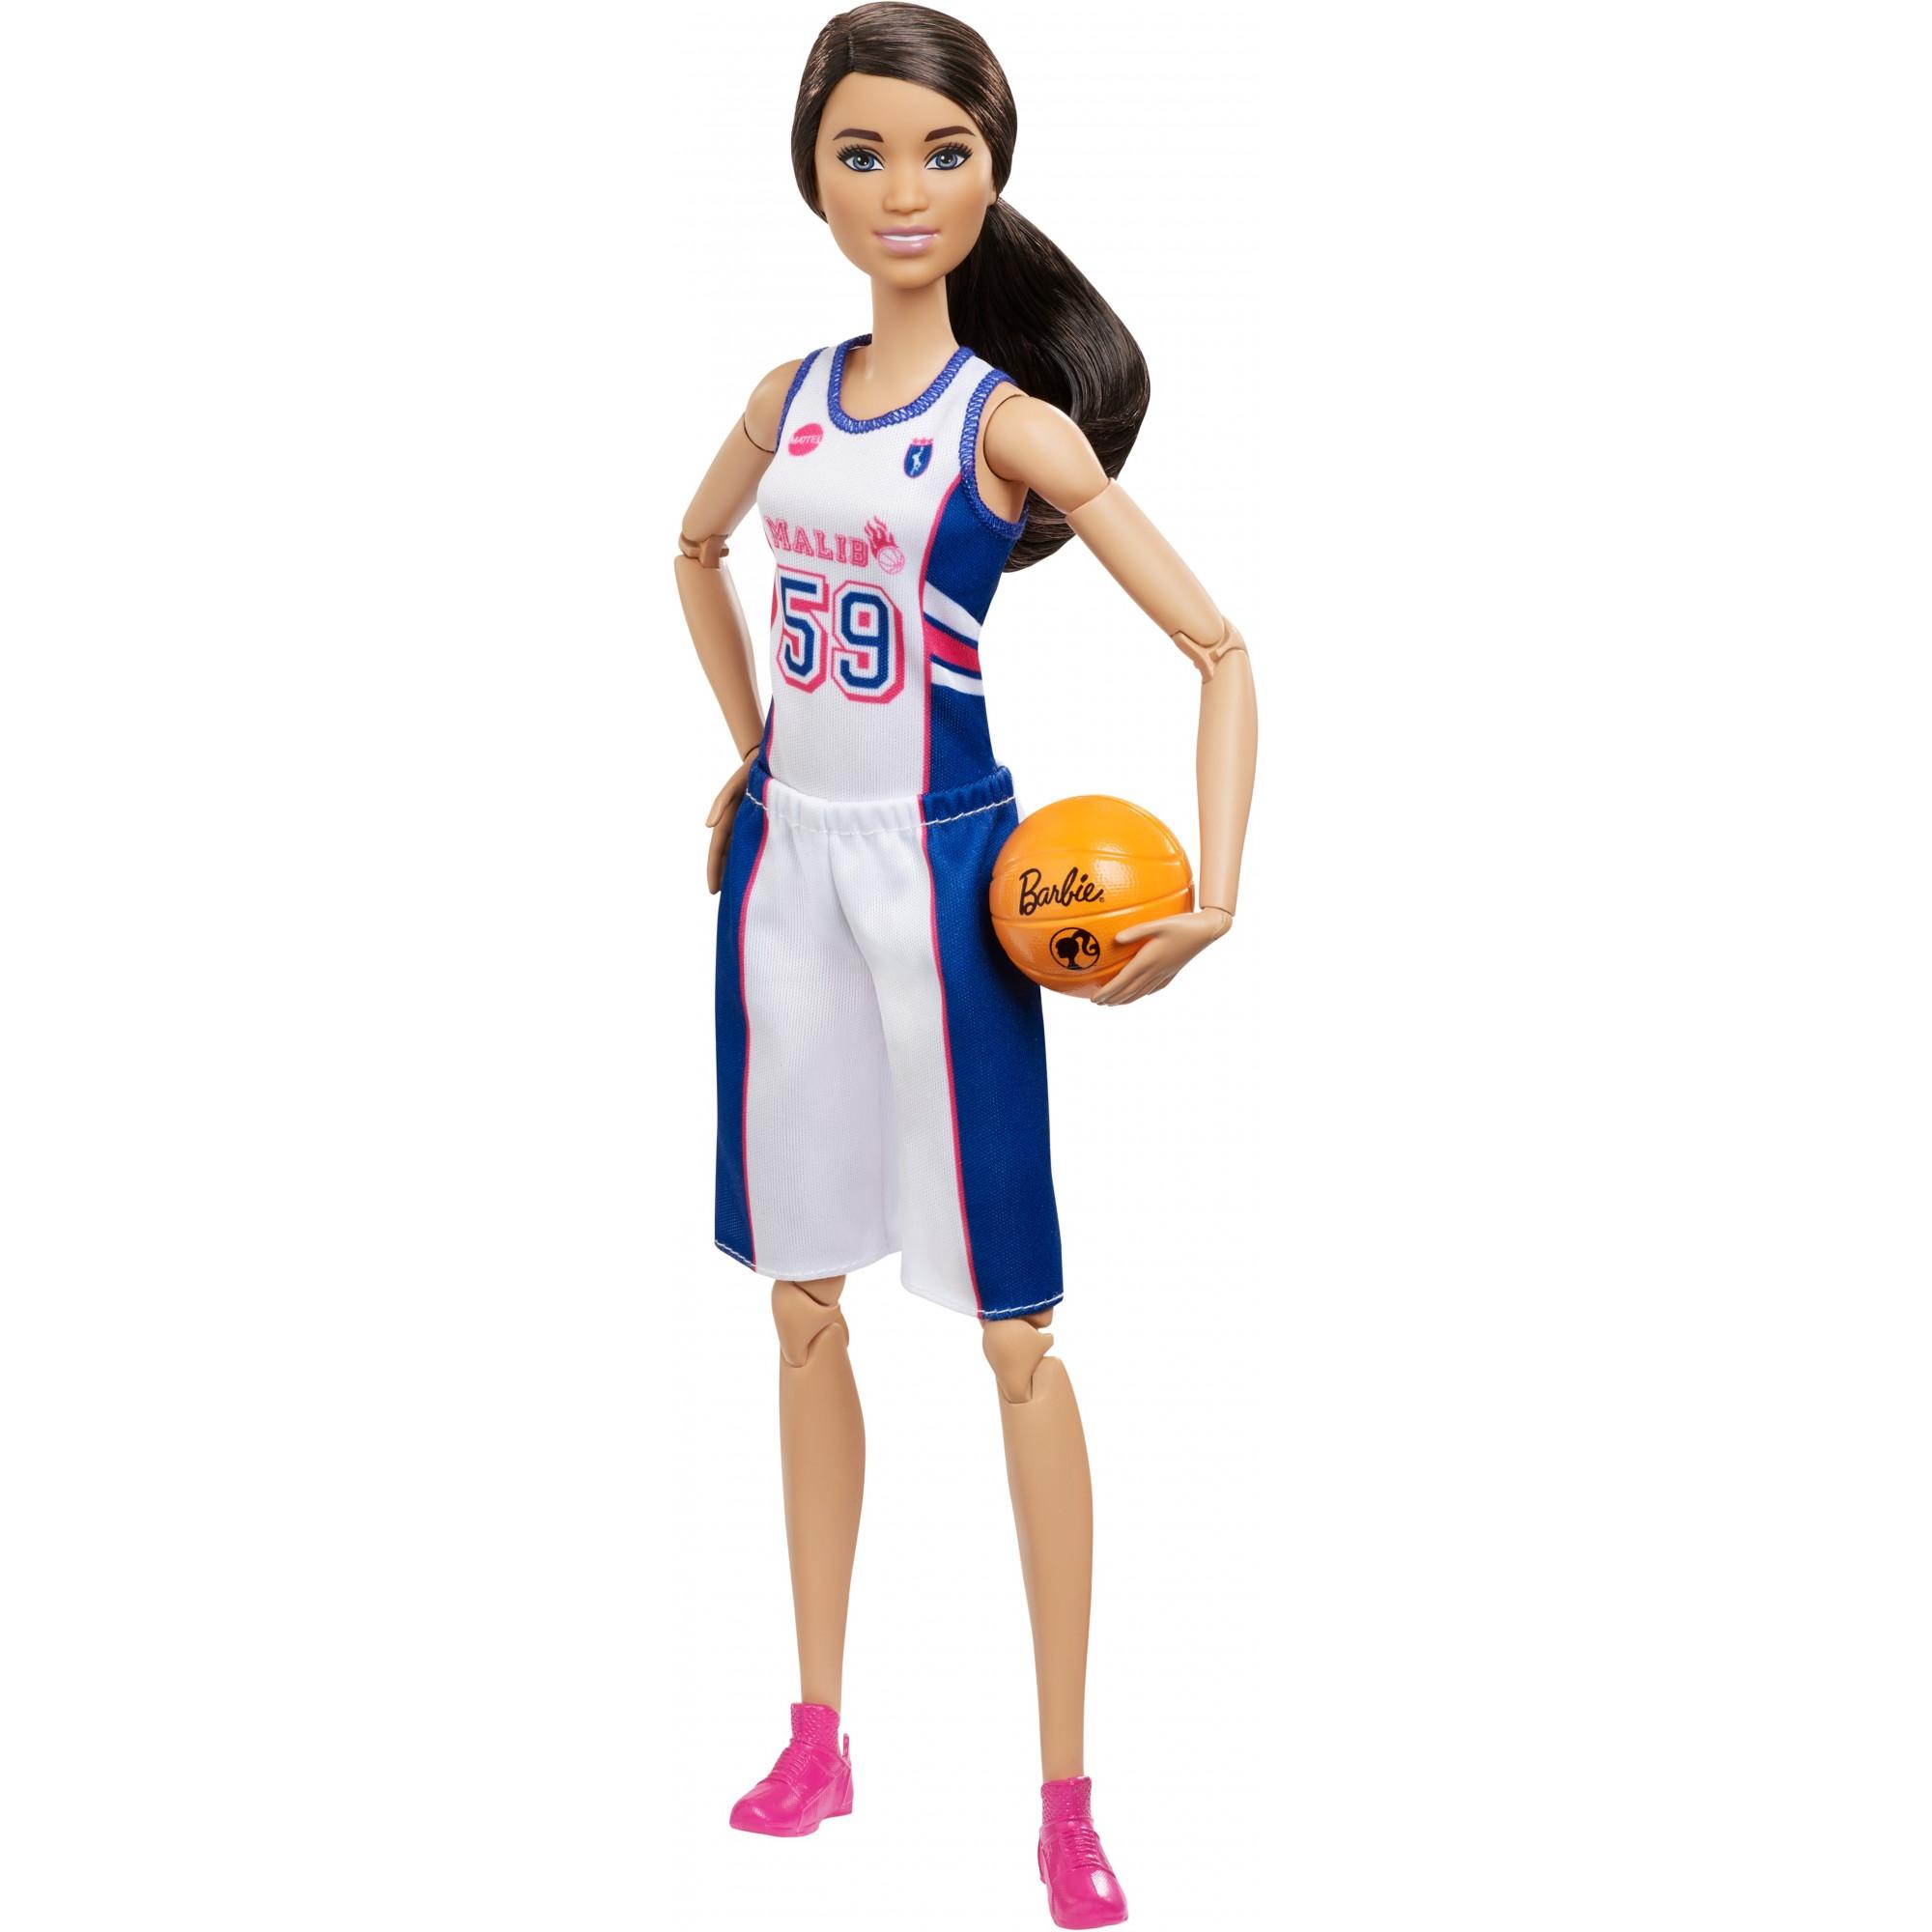 Barbie Made to Move Basketball Player Doll, Brunette - image 1 of 7